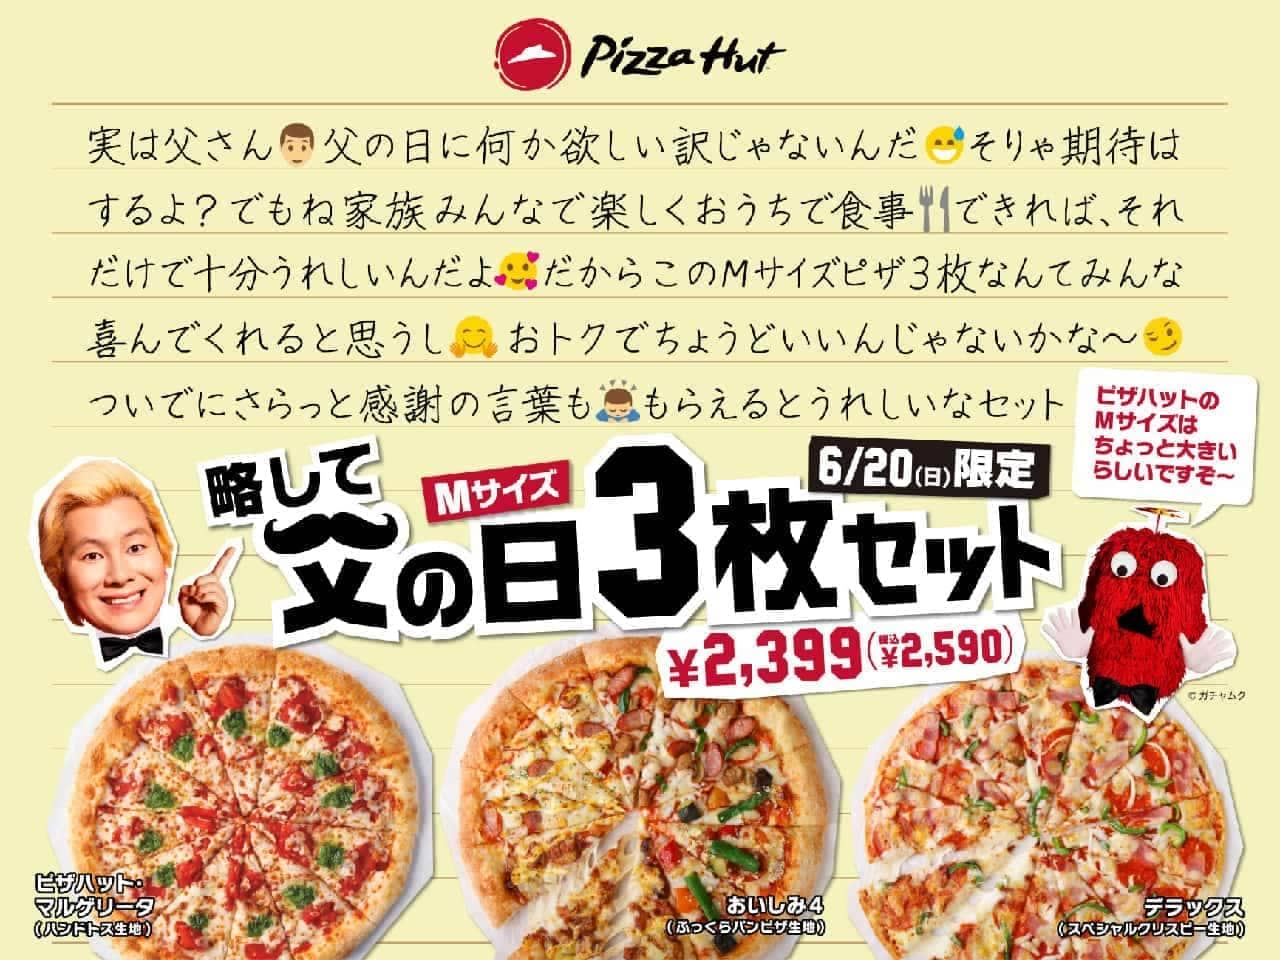 Pizza Hut "Father's Day 3 Sheets Set"